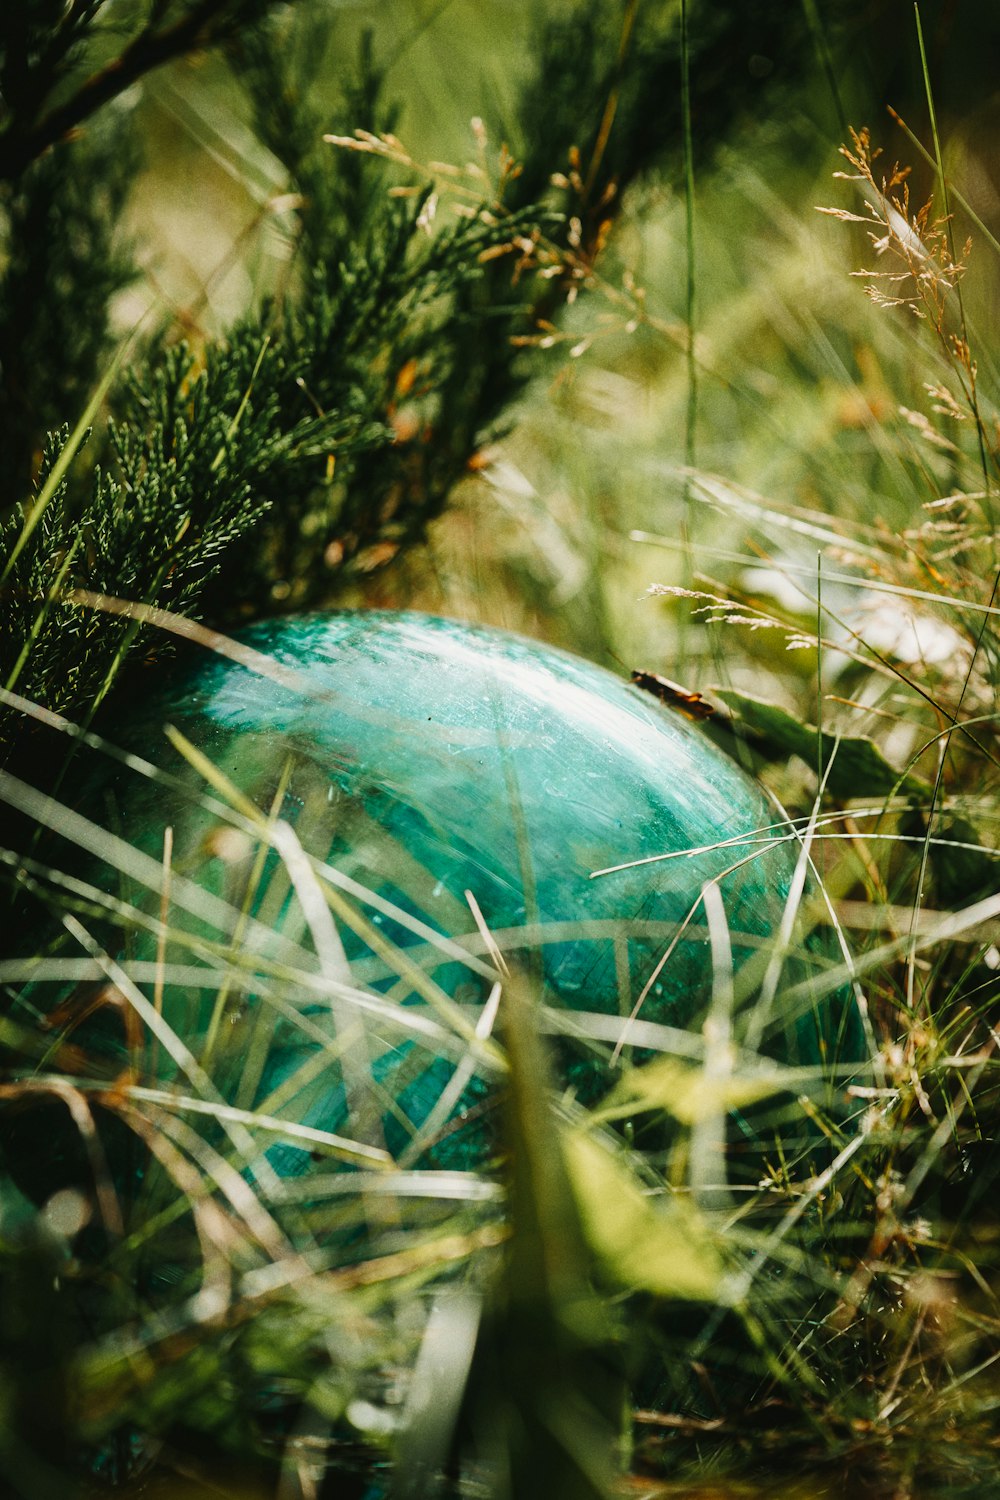 a green object sitting in the grass near a tree